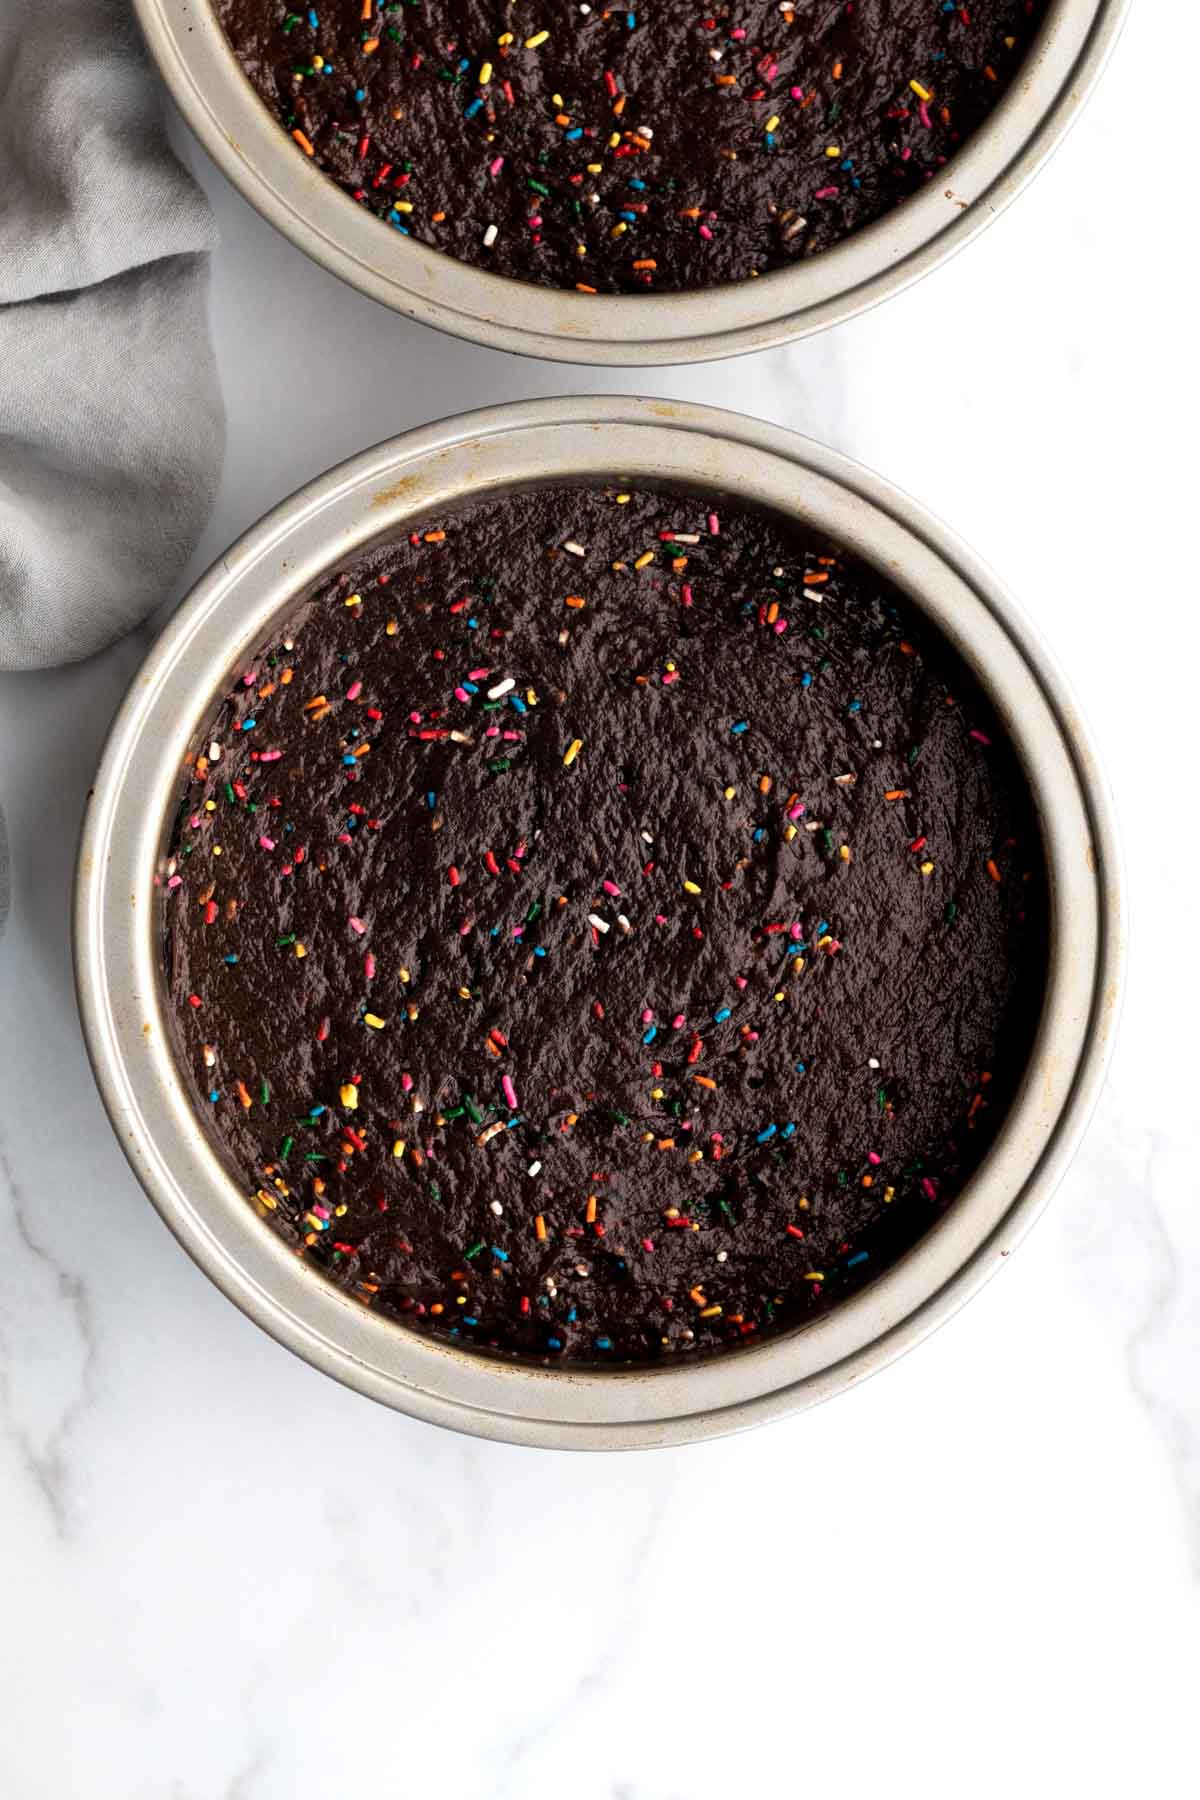 Putting the rainbow dotted batter into a cake pan.